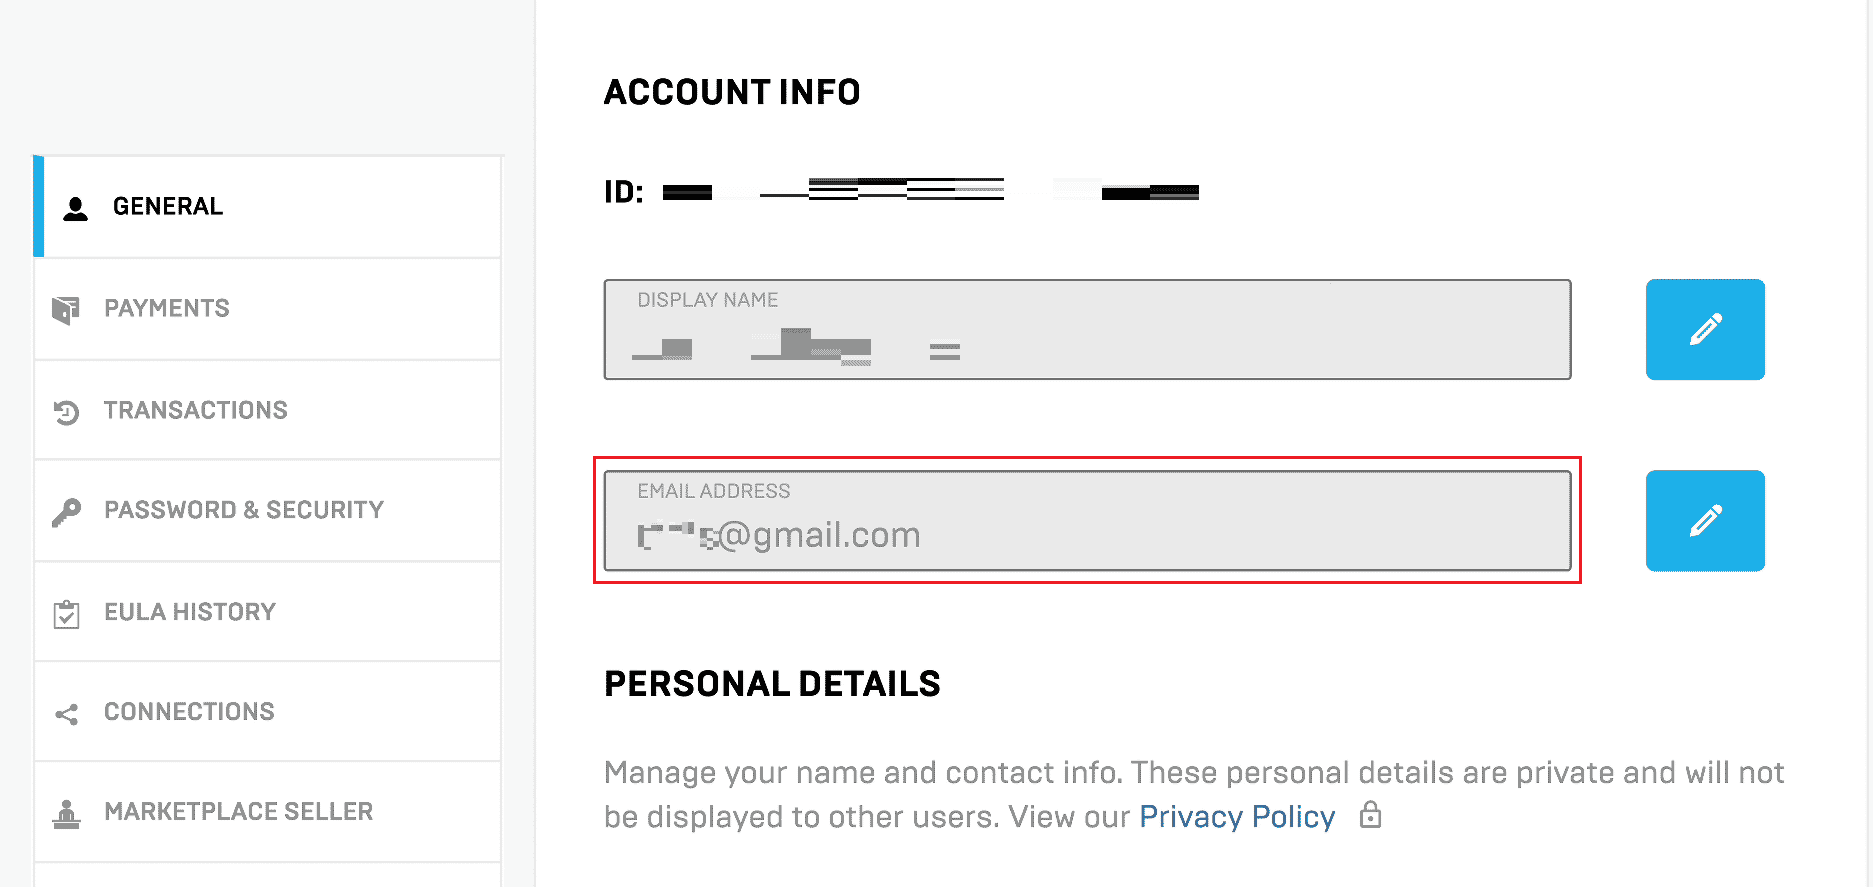 Email address on the Account page in the GENERAL- ACCOUNT INFO section